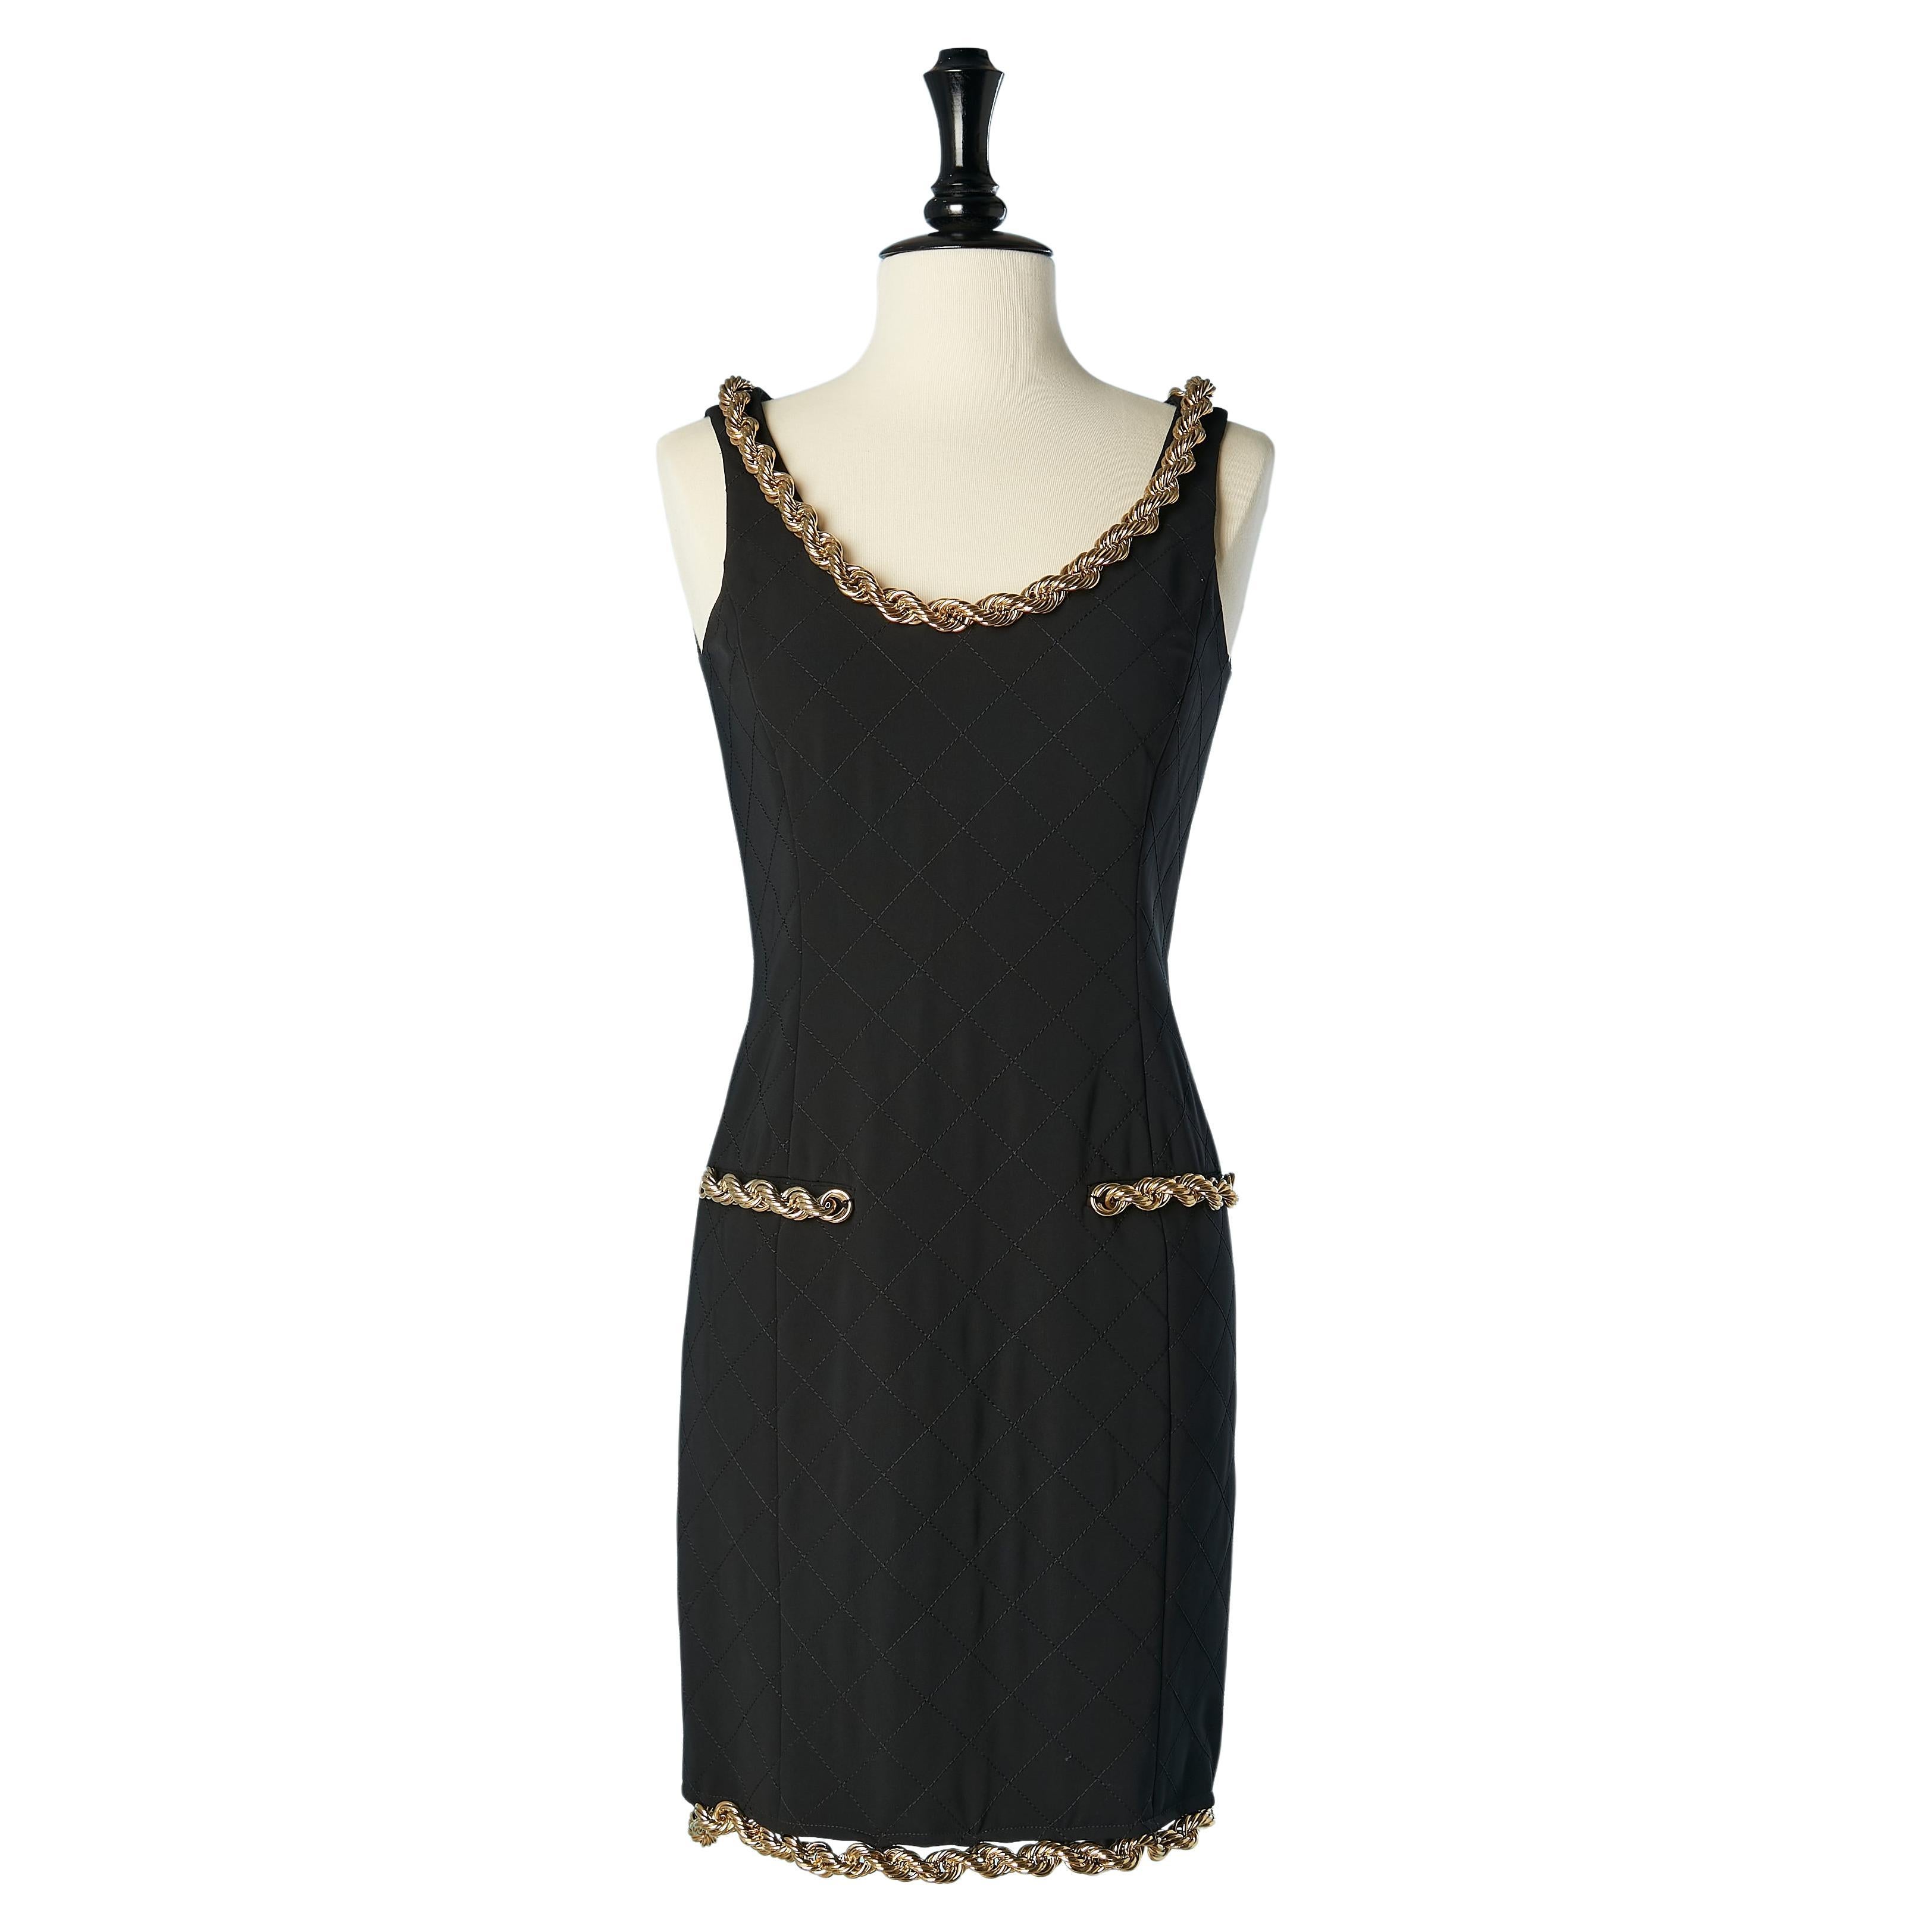 Black top stitched cocktail dress with gold metal chain edge Moschino Couture  For Sale